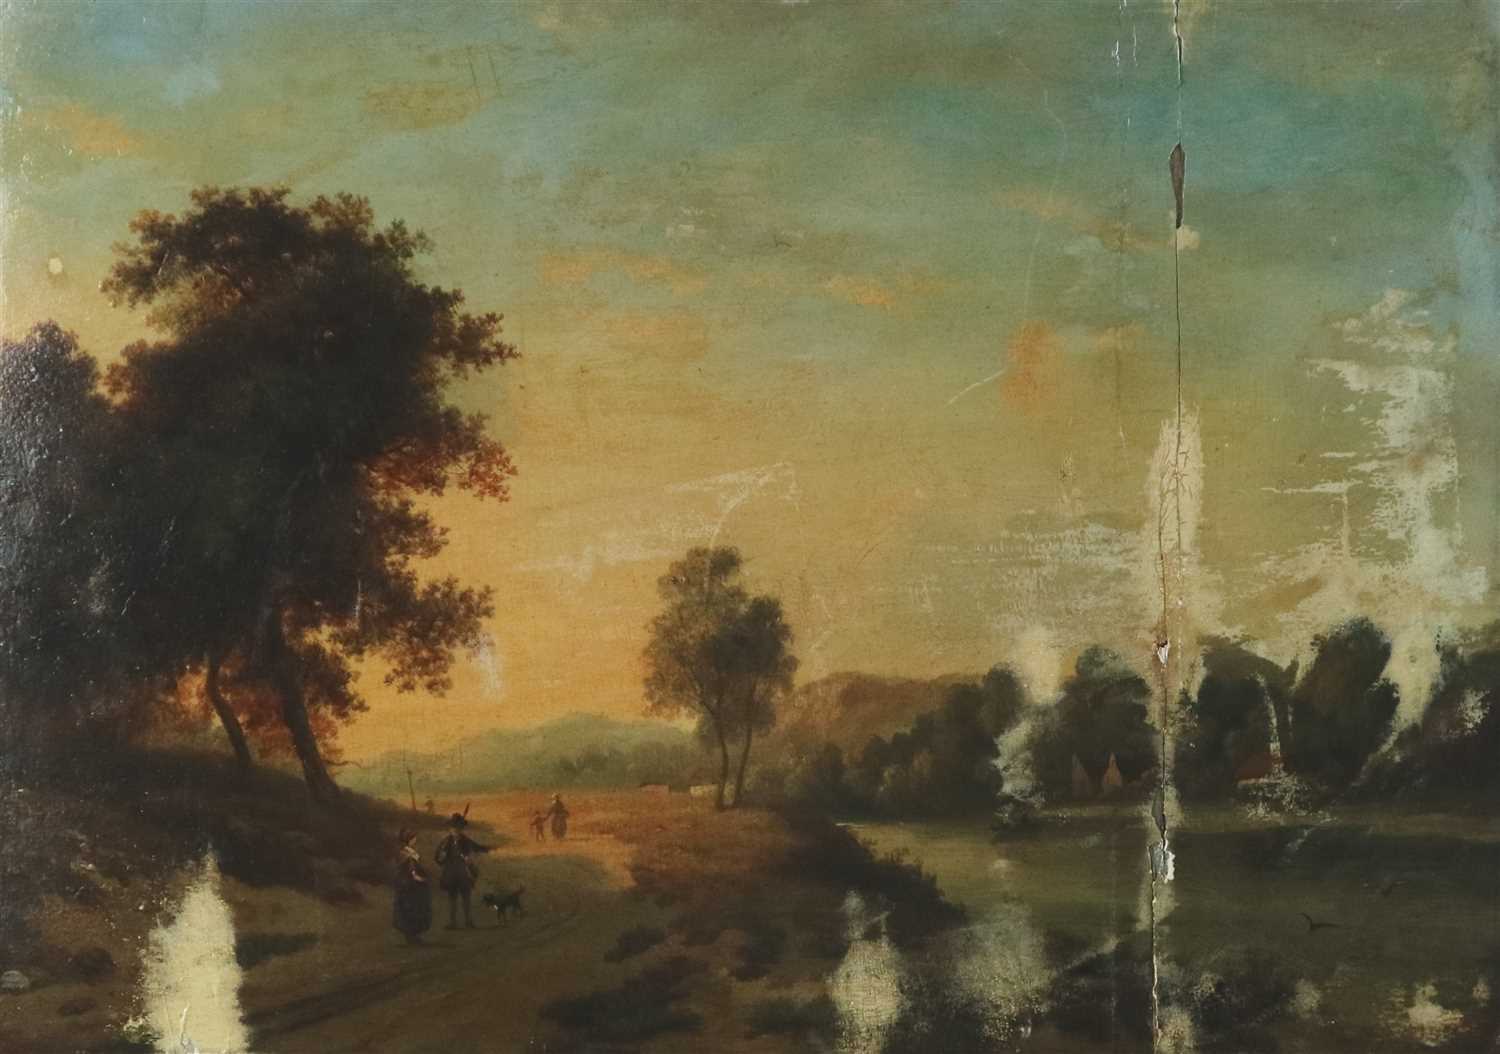 Lot 27 - Attributed to Richard Wilson (1714-1782), River Landscape